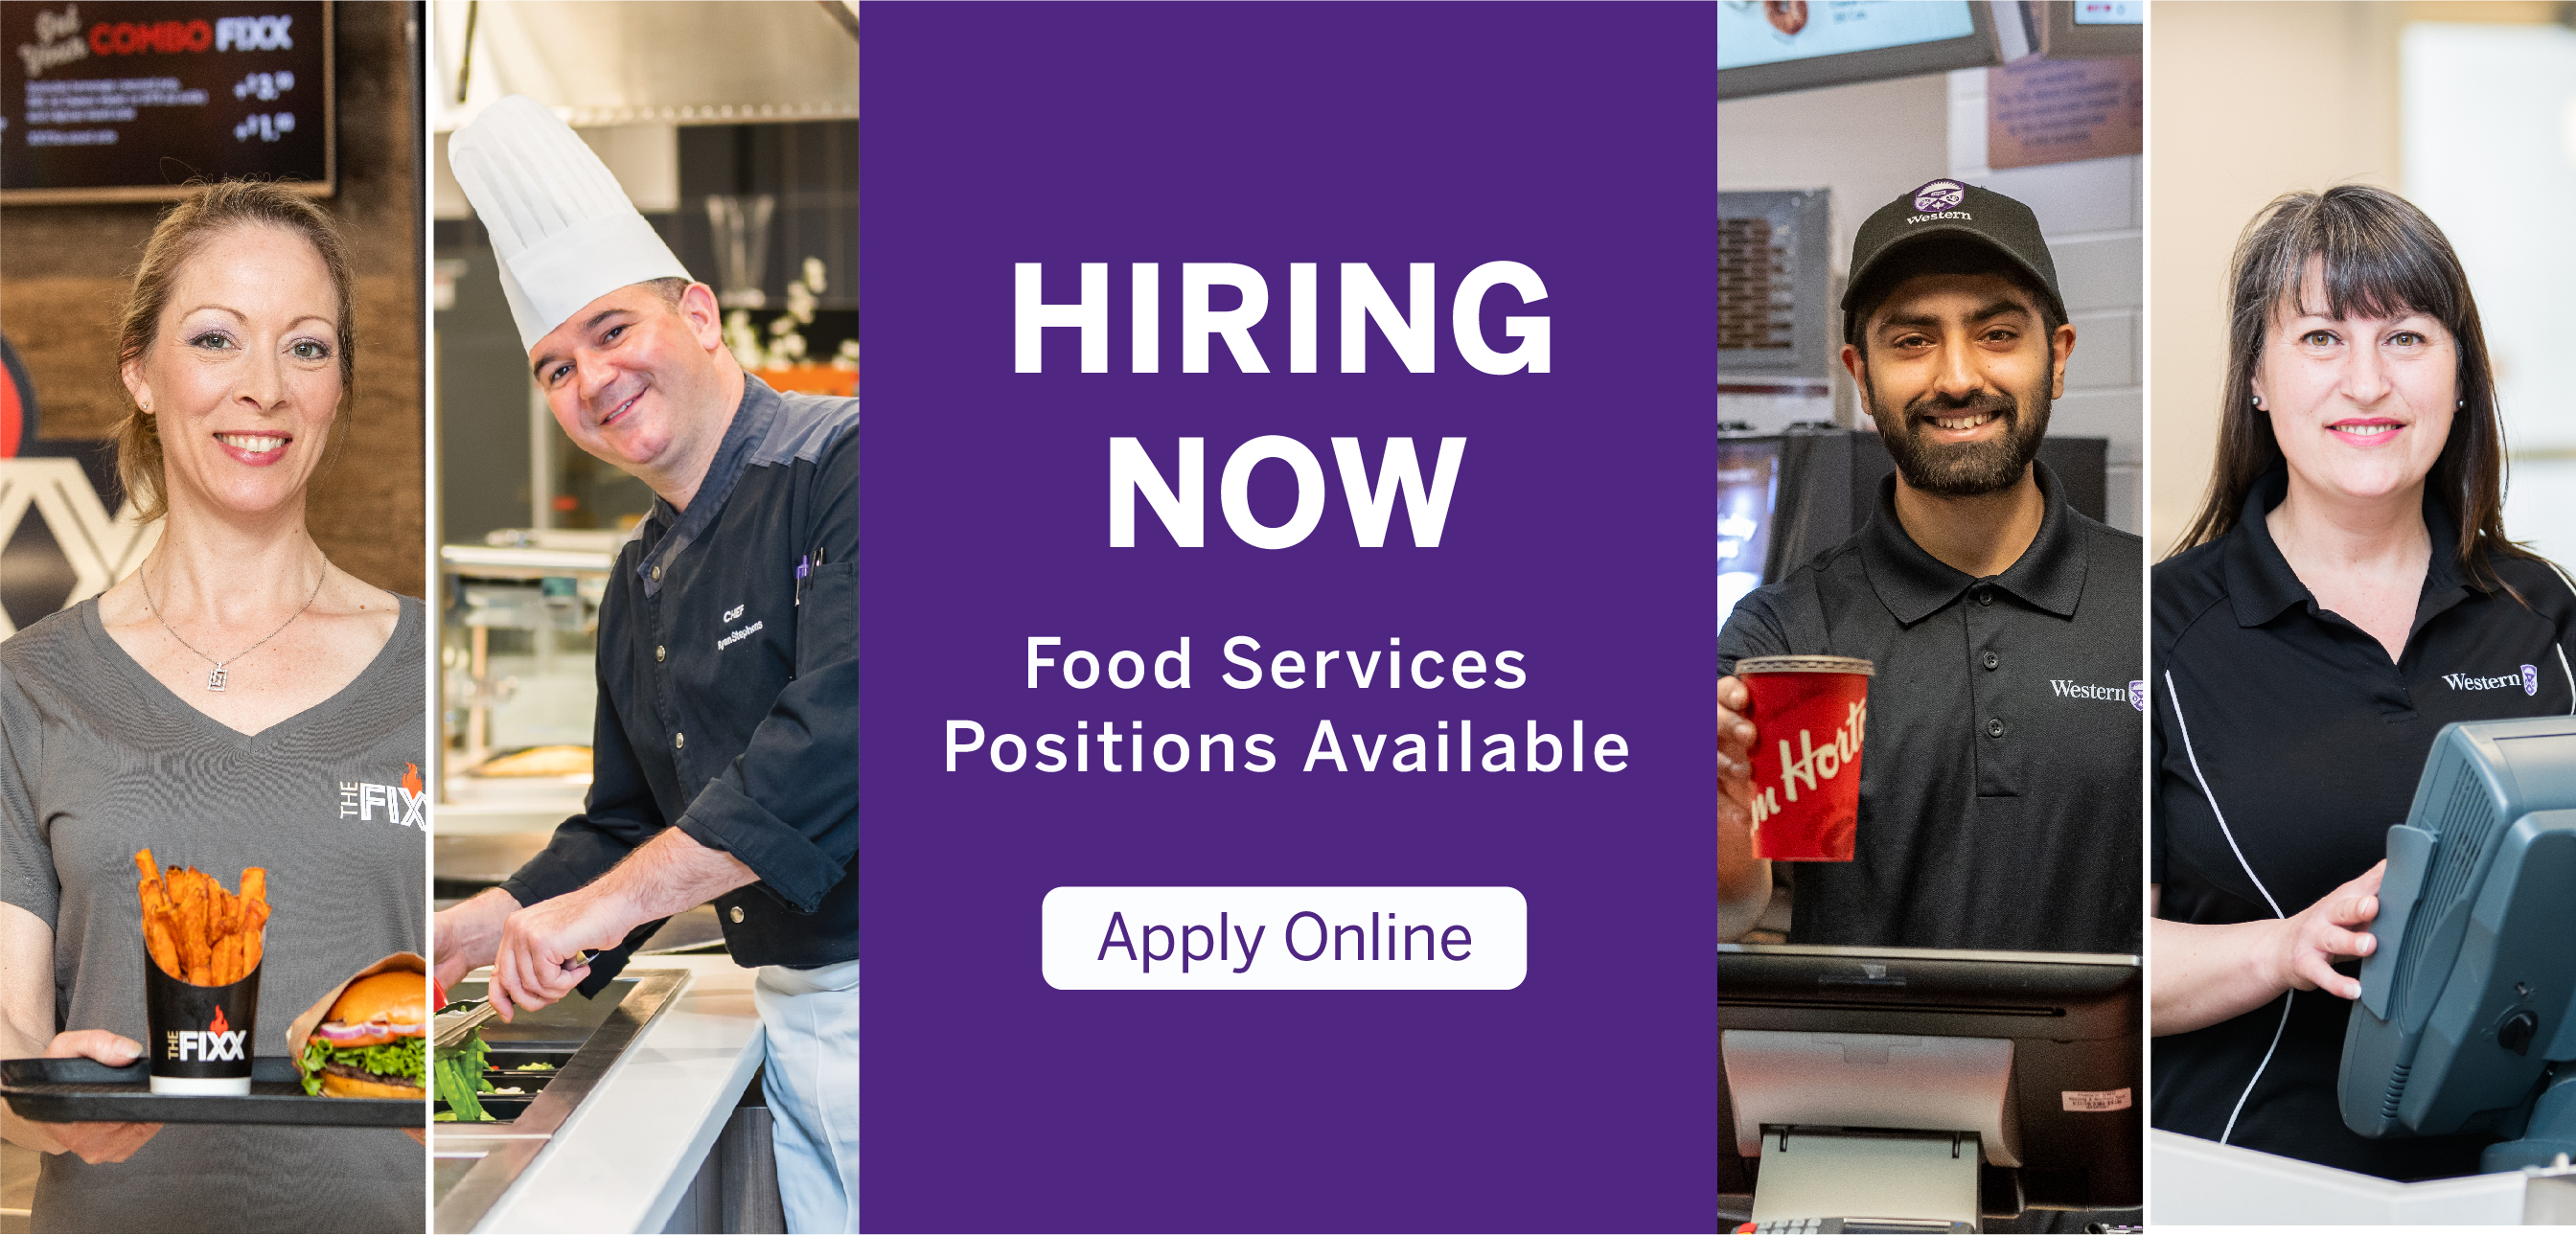 Hiring Now. Food Services Positions Available.